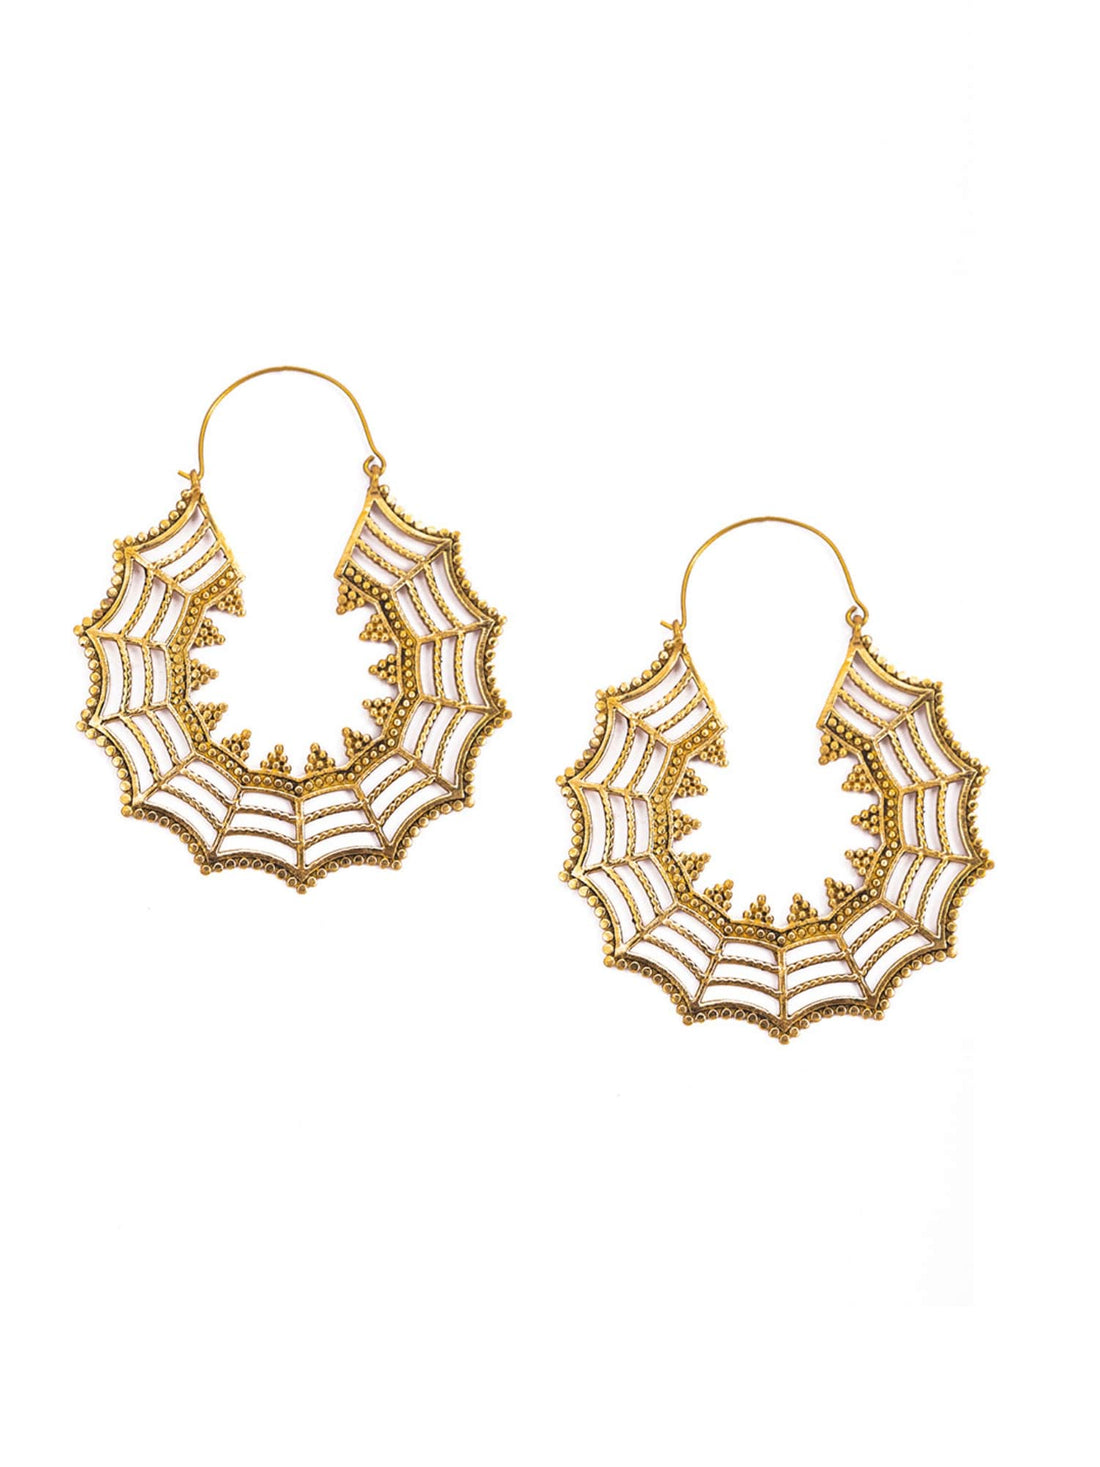 Party Wear Hoops Earrings - Artistic Expression Gold and Silver-Plated Brass Earrings By Studio One Love